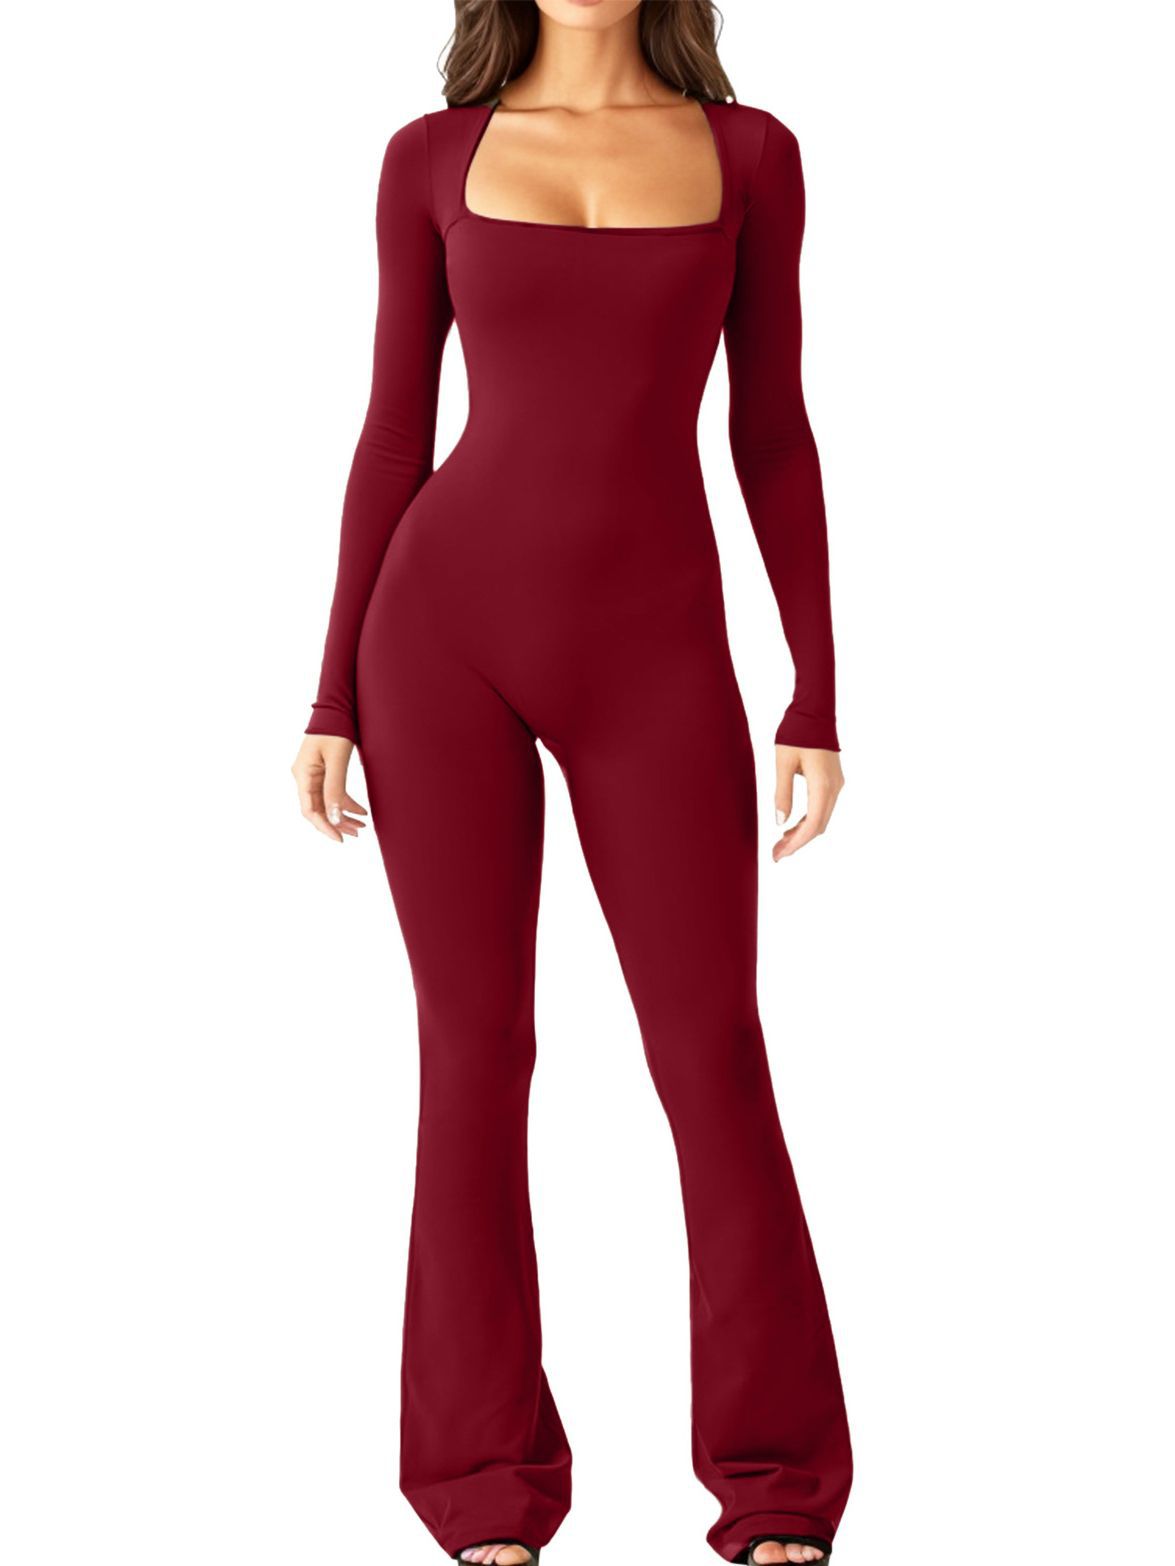 Women's Long Sleeve Belly And Waist Shaping Square Collar High Elastic Jumpsuit